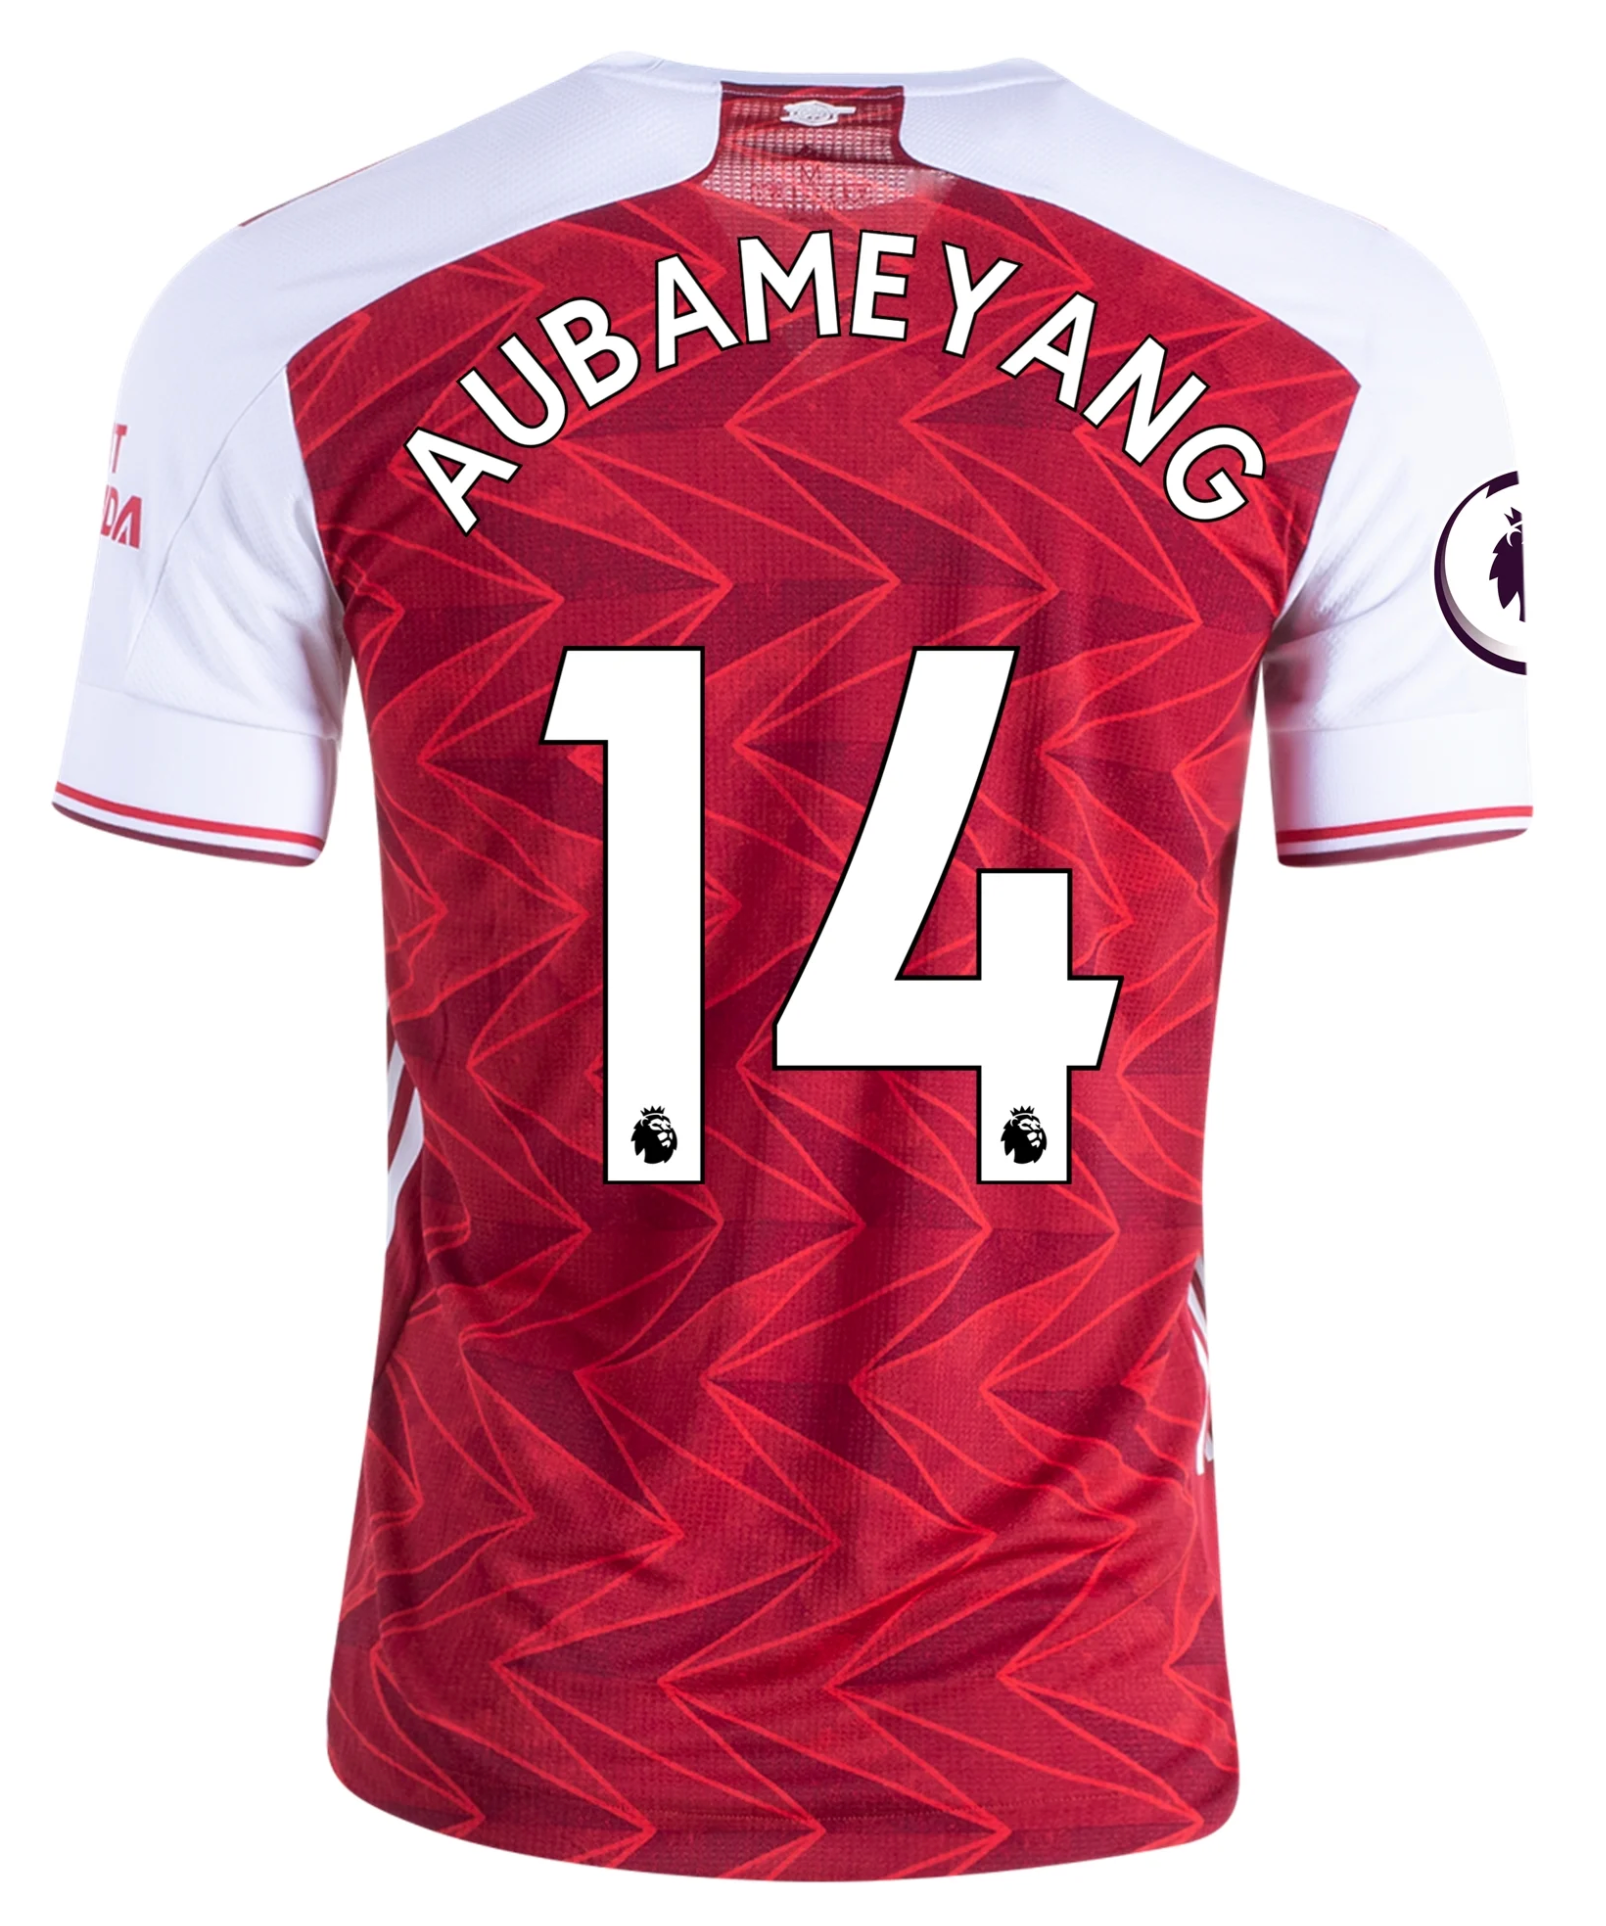 arsenal authentic home jersey